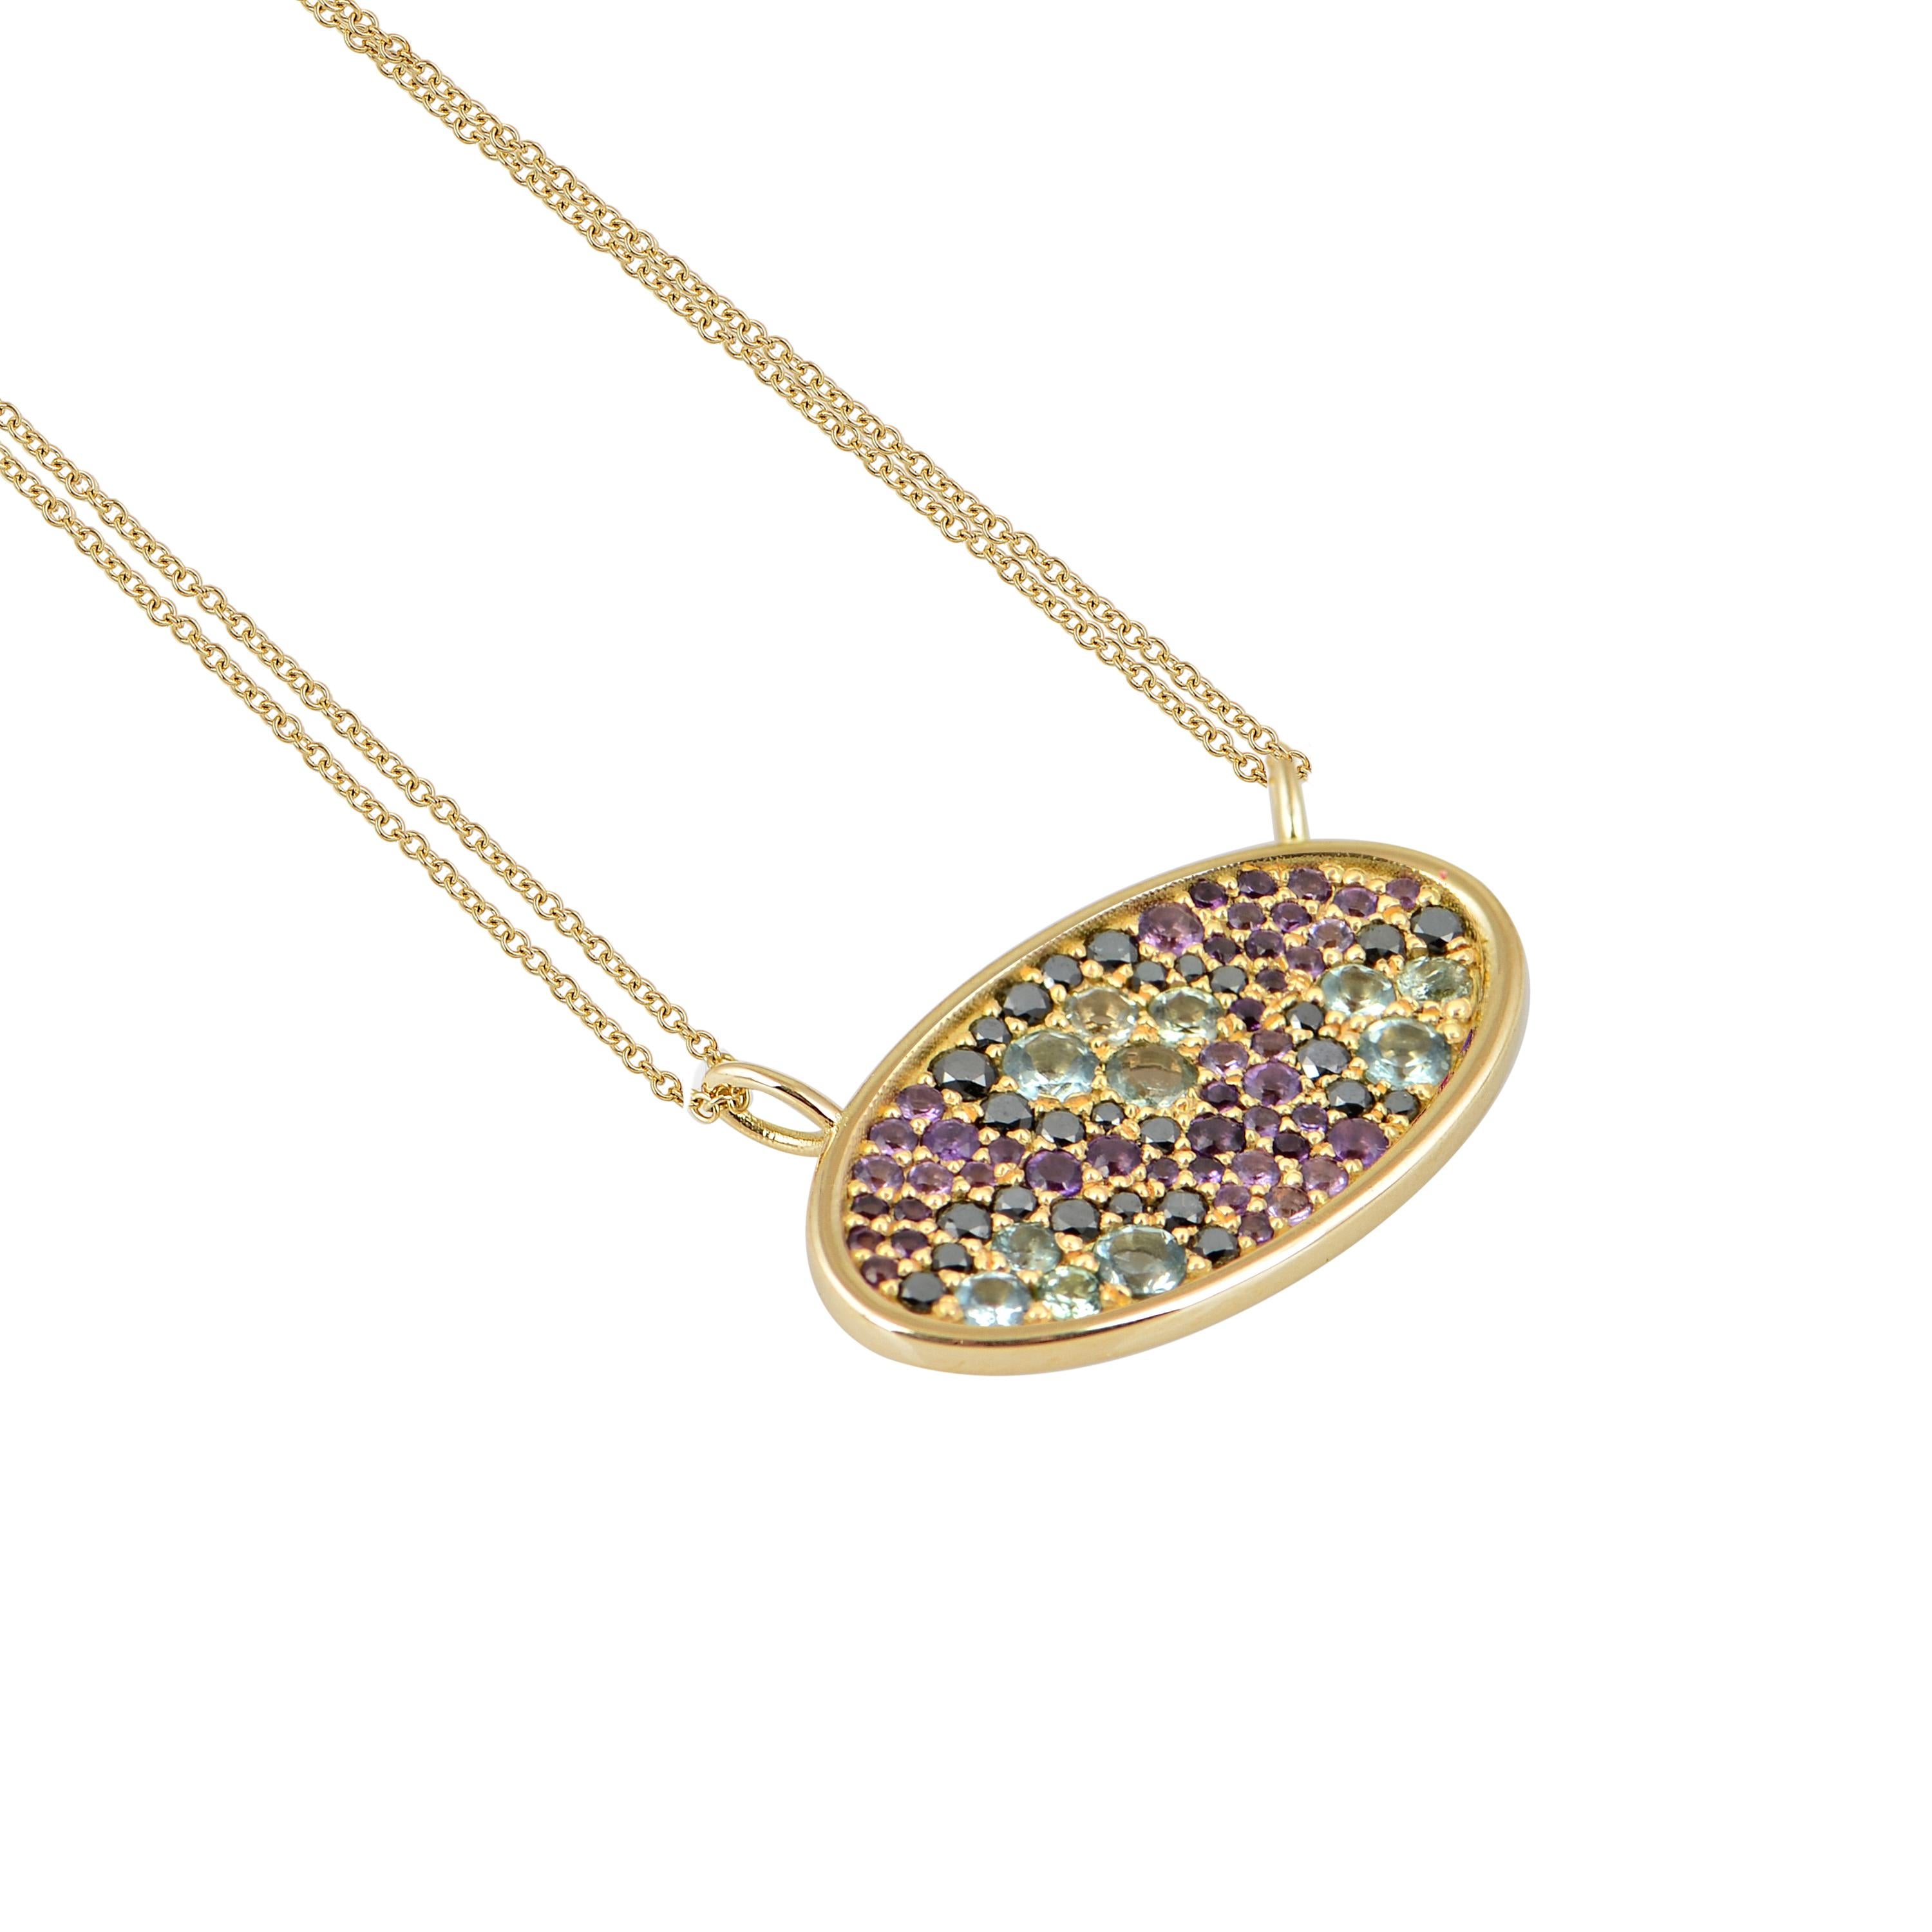 Designer: Alexia Gryllaki

Dimensions: motif 23x13mm, double-chain 800mm (half when folded)
Weight: approximately 5.8g 
Barcode: NEX2005


Leopard print oval pendant in 18 karat yellow gold with a double-chain and mosaic pavé made of round